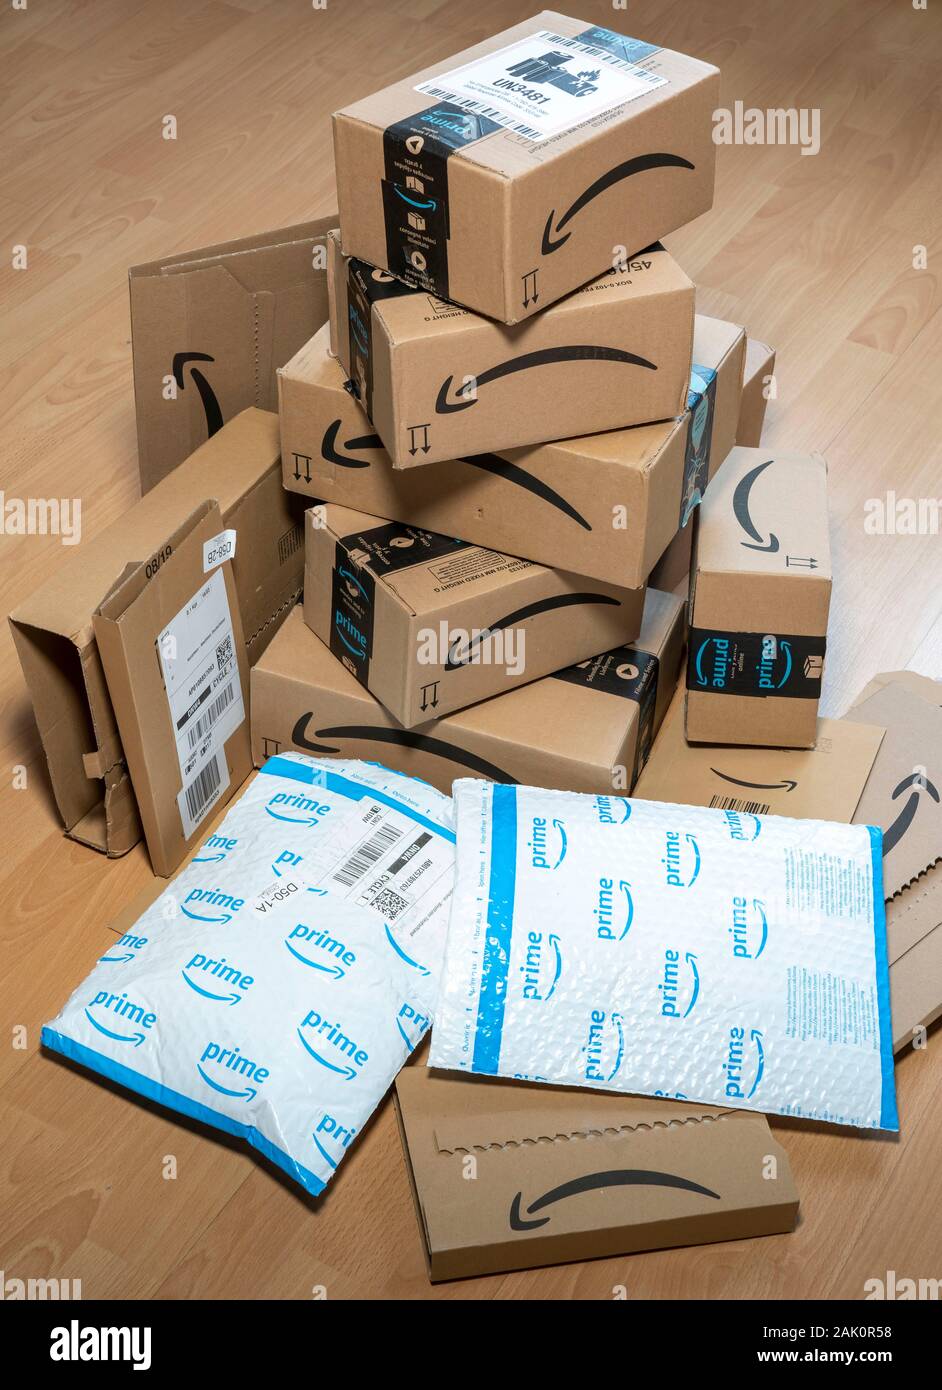 Packages from online mail order company Amazon, various packaging, Amazon Prime, Stock Photo